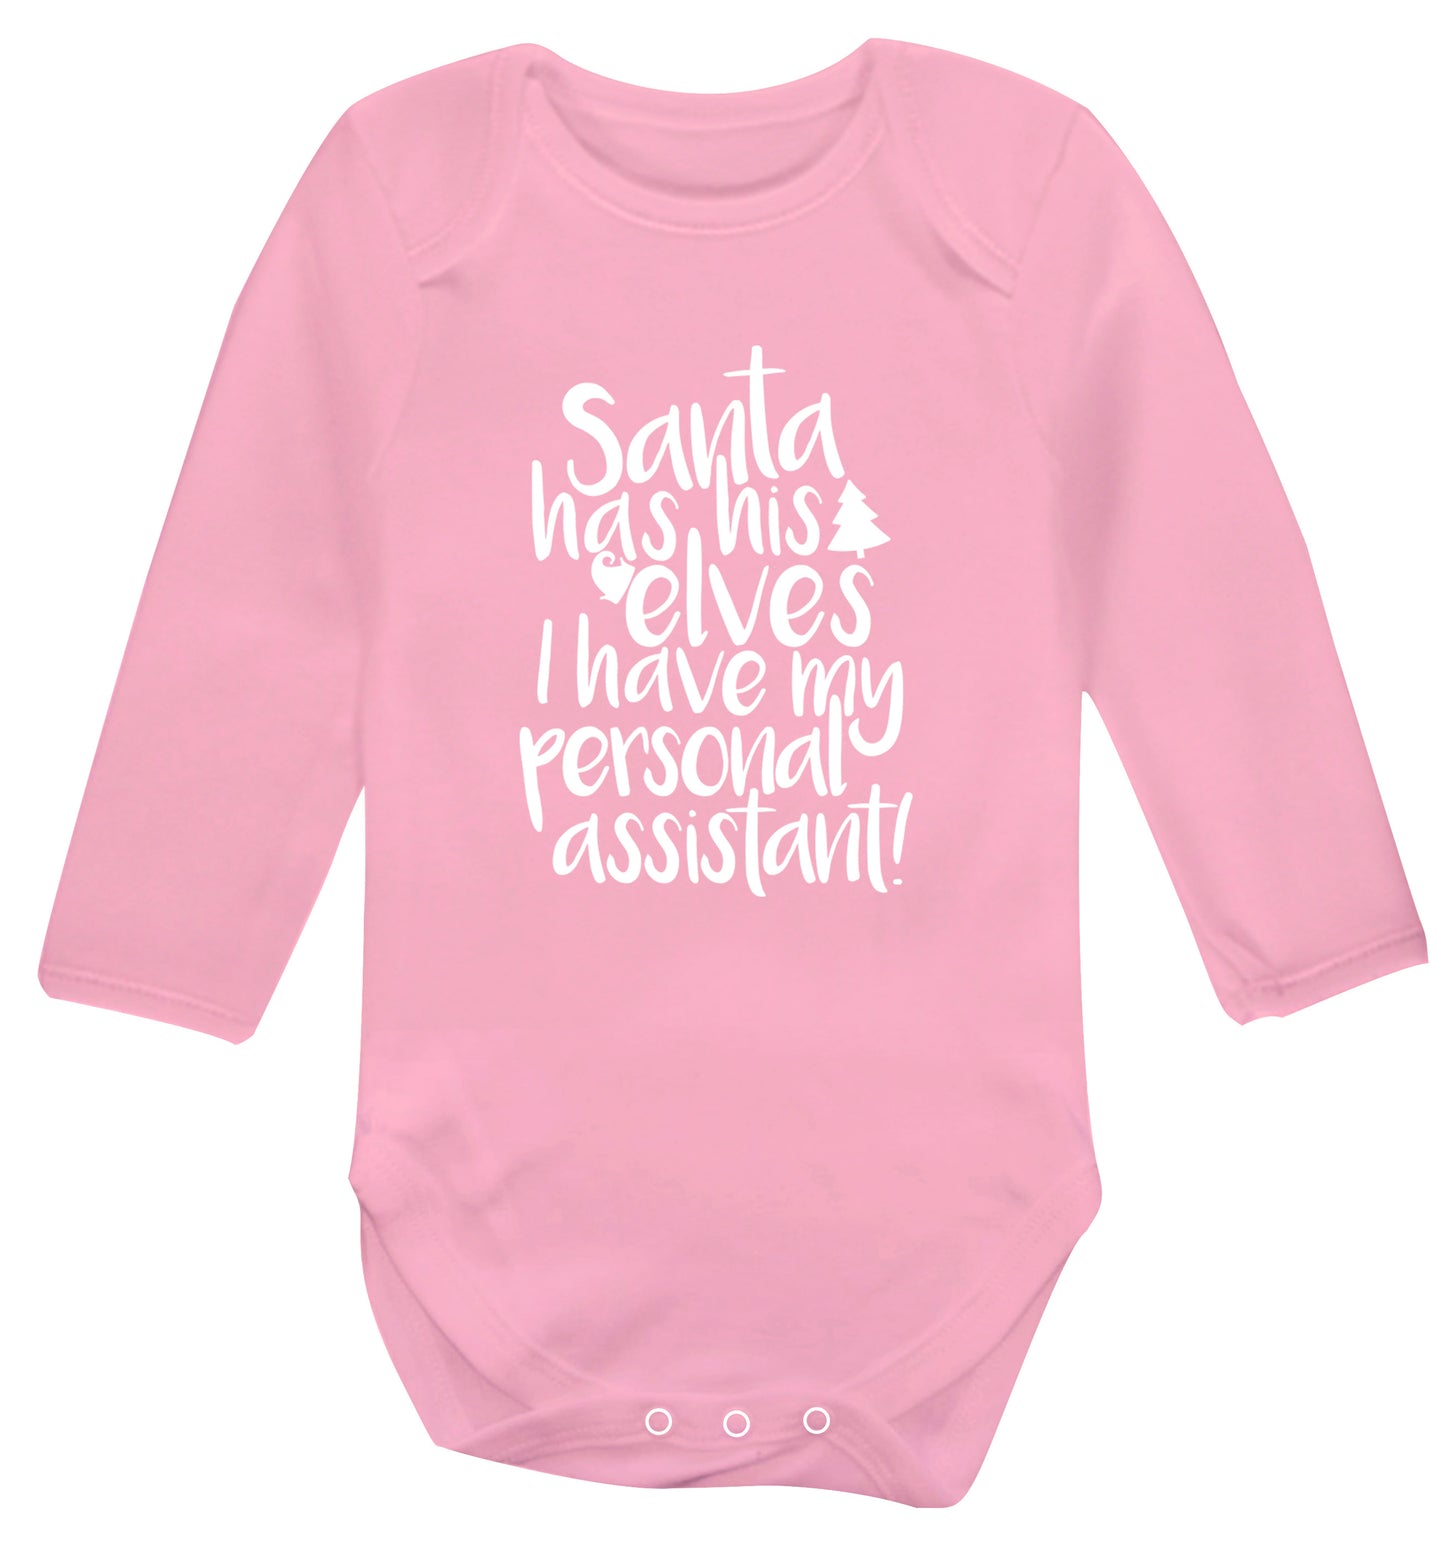 Santa has his elves I have my personal assistant Baby Vest long sleeved pale pink 6-12 months